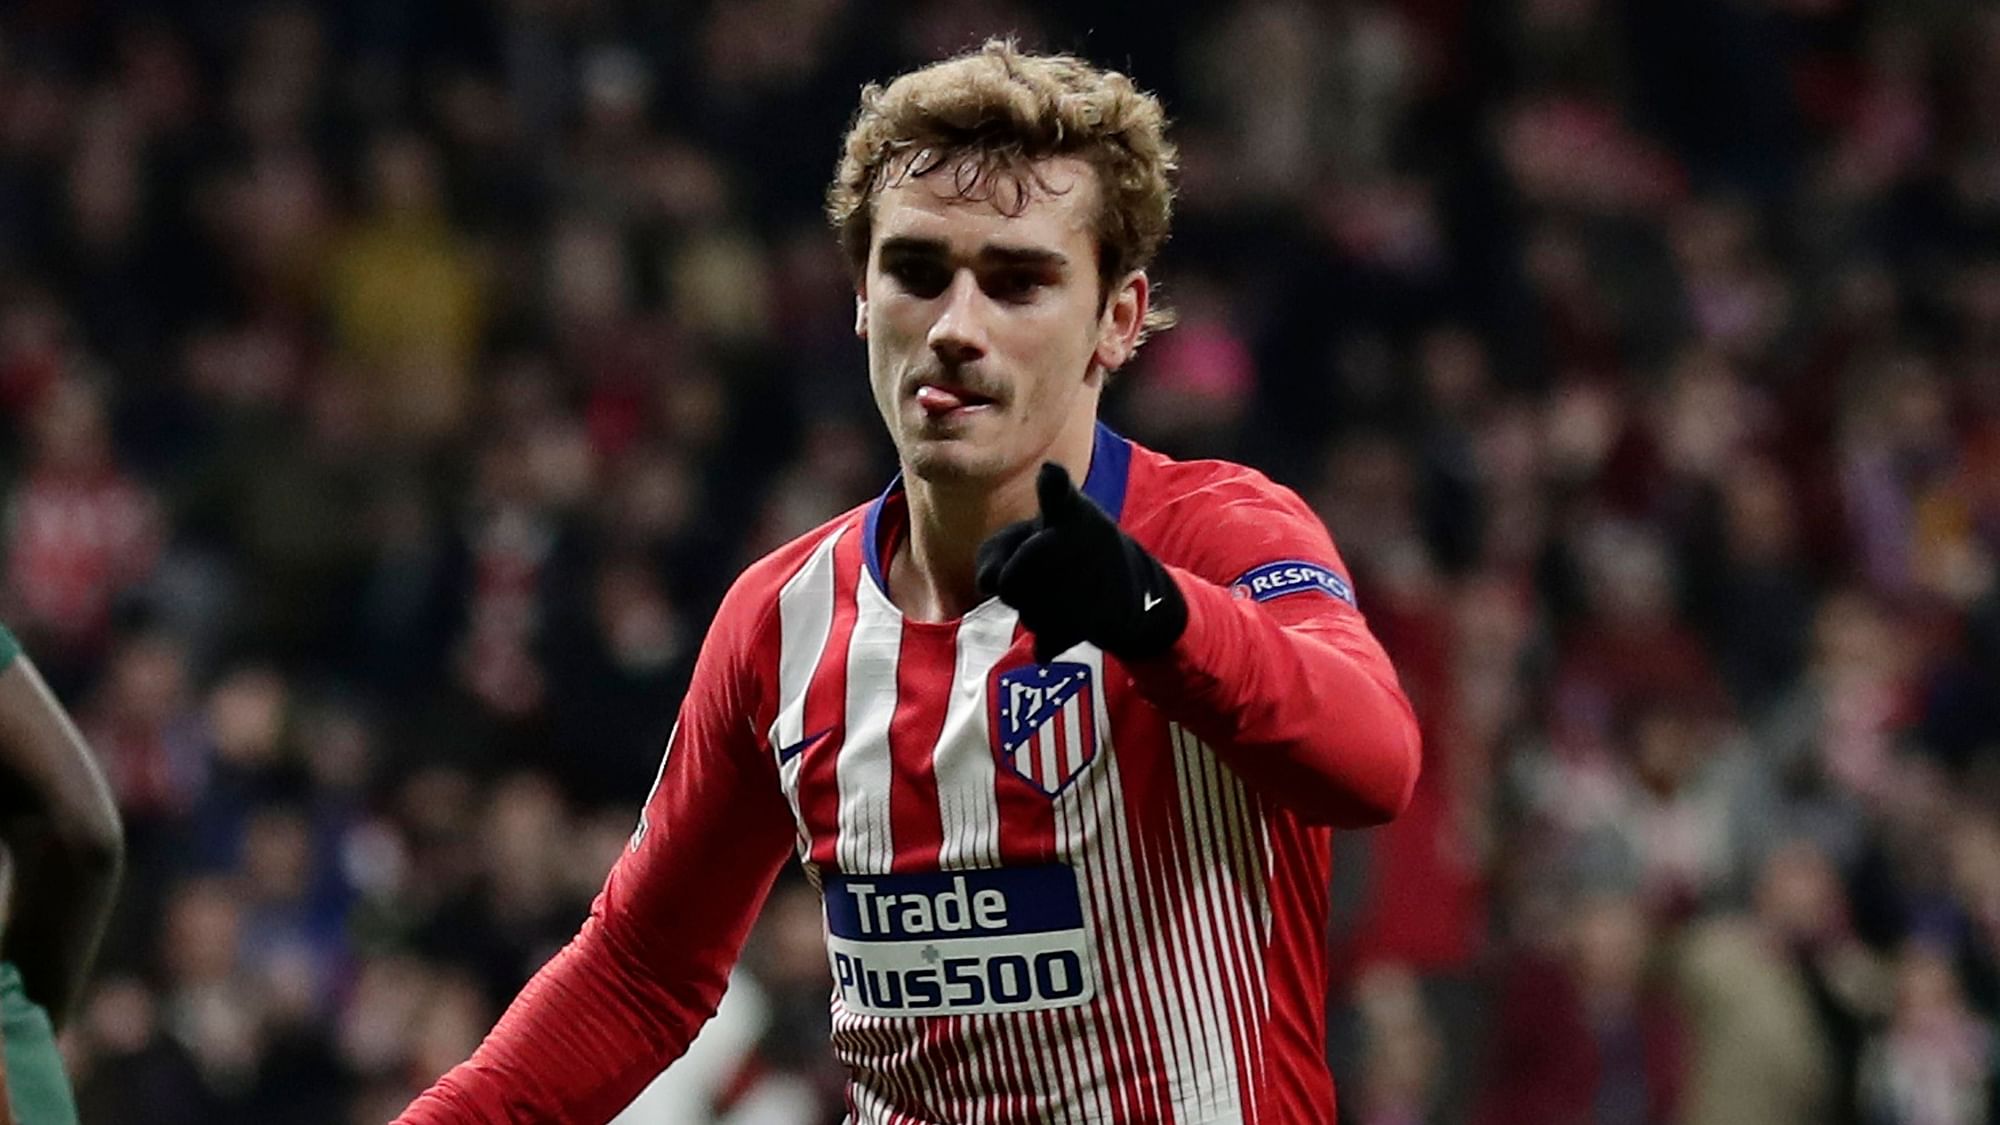 France forward Antoine Griezmann agreed to join the Spanish champions Barcelona on Friday, 12 July